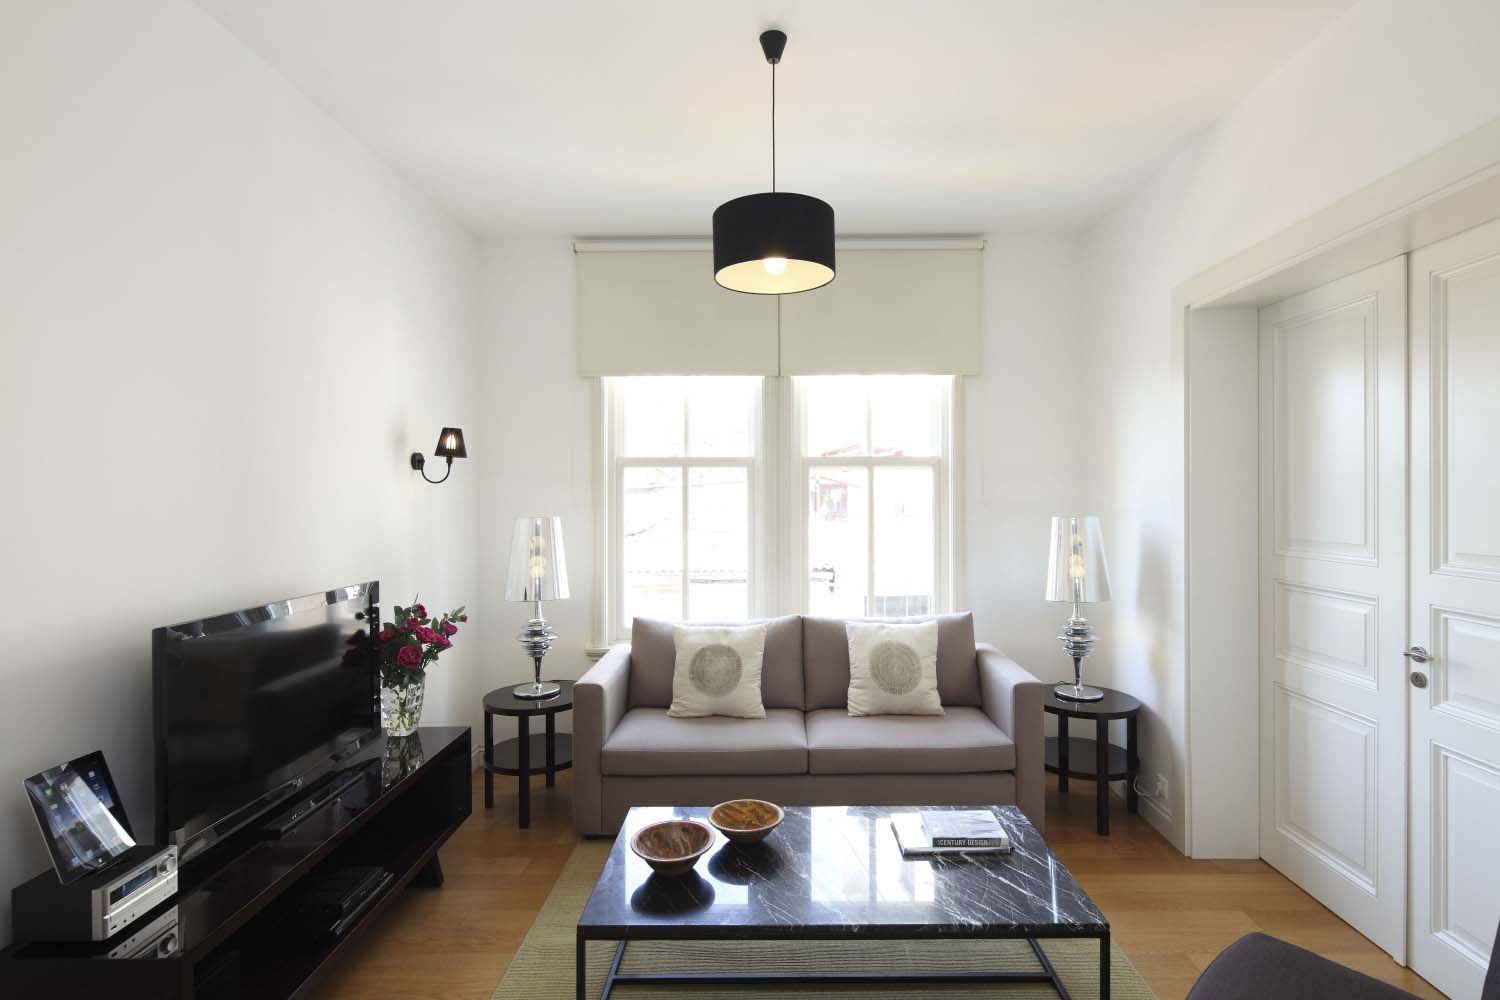 1 BED Istanbul apartment for rent by famous Tophane-i Amire